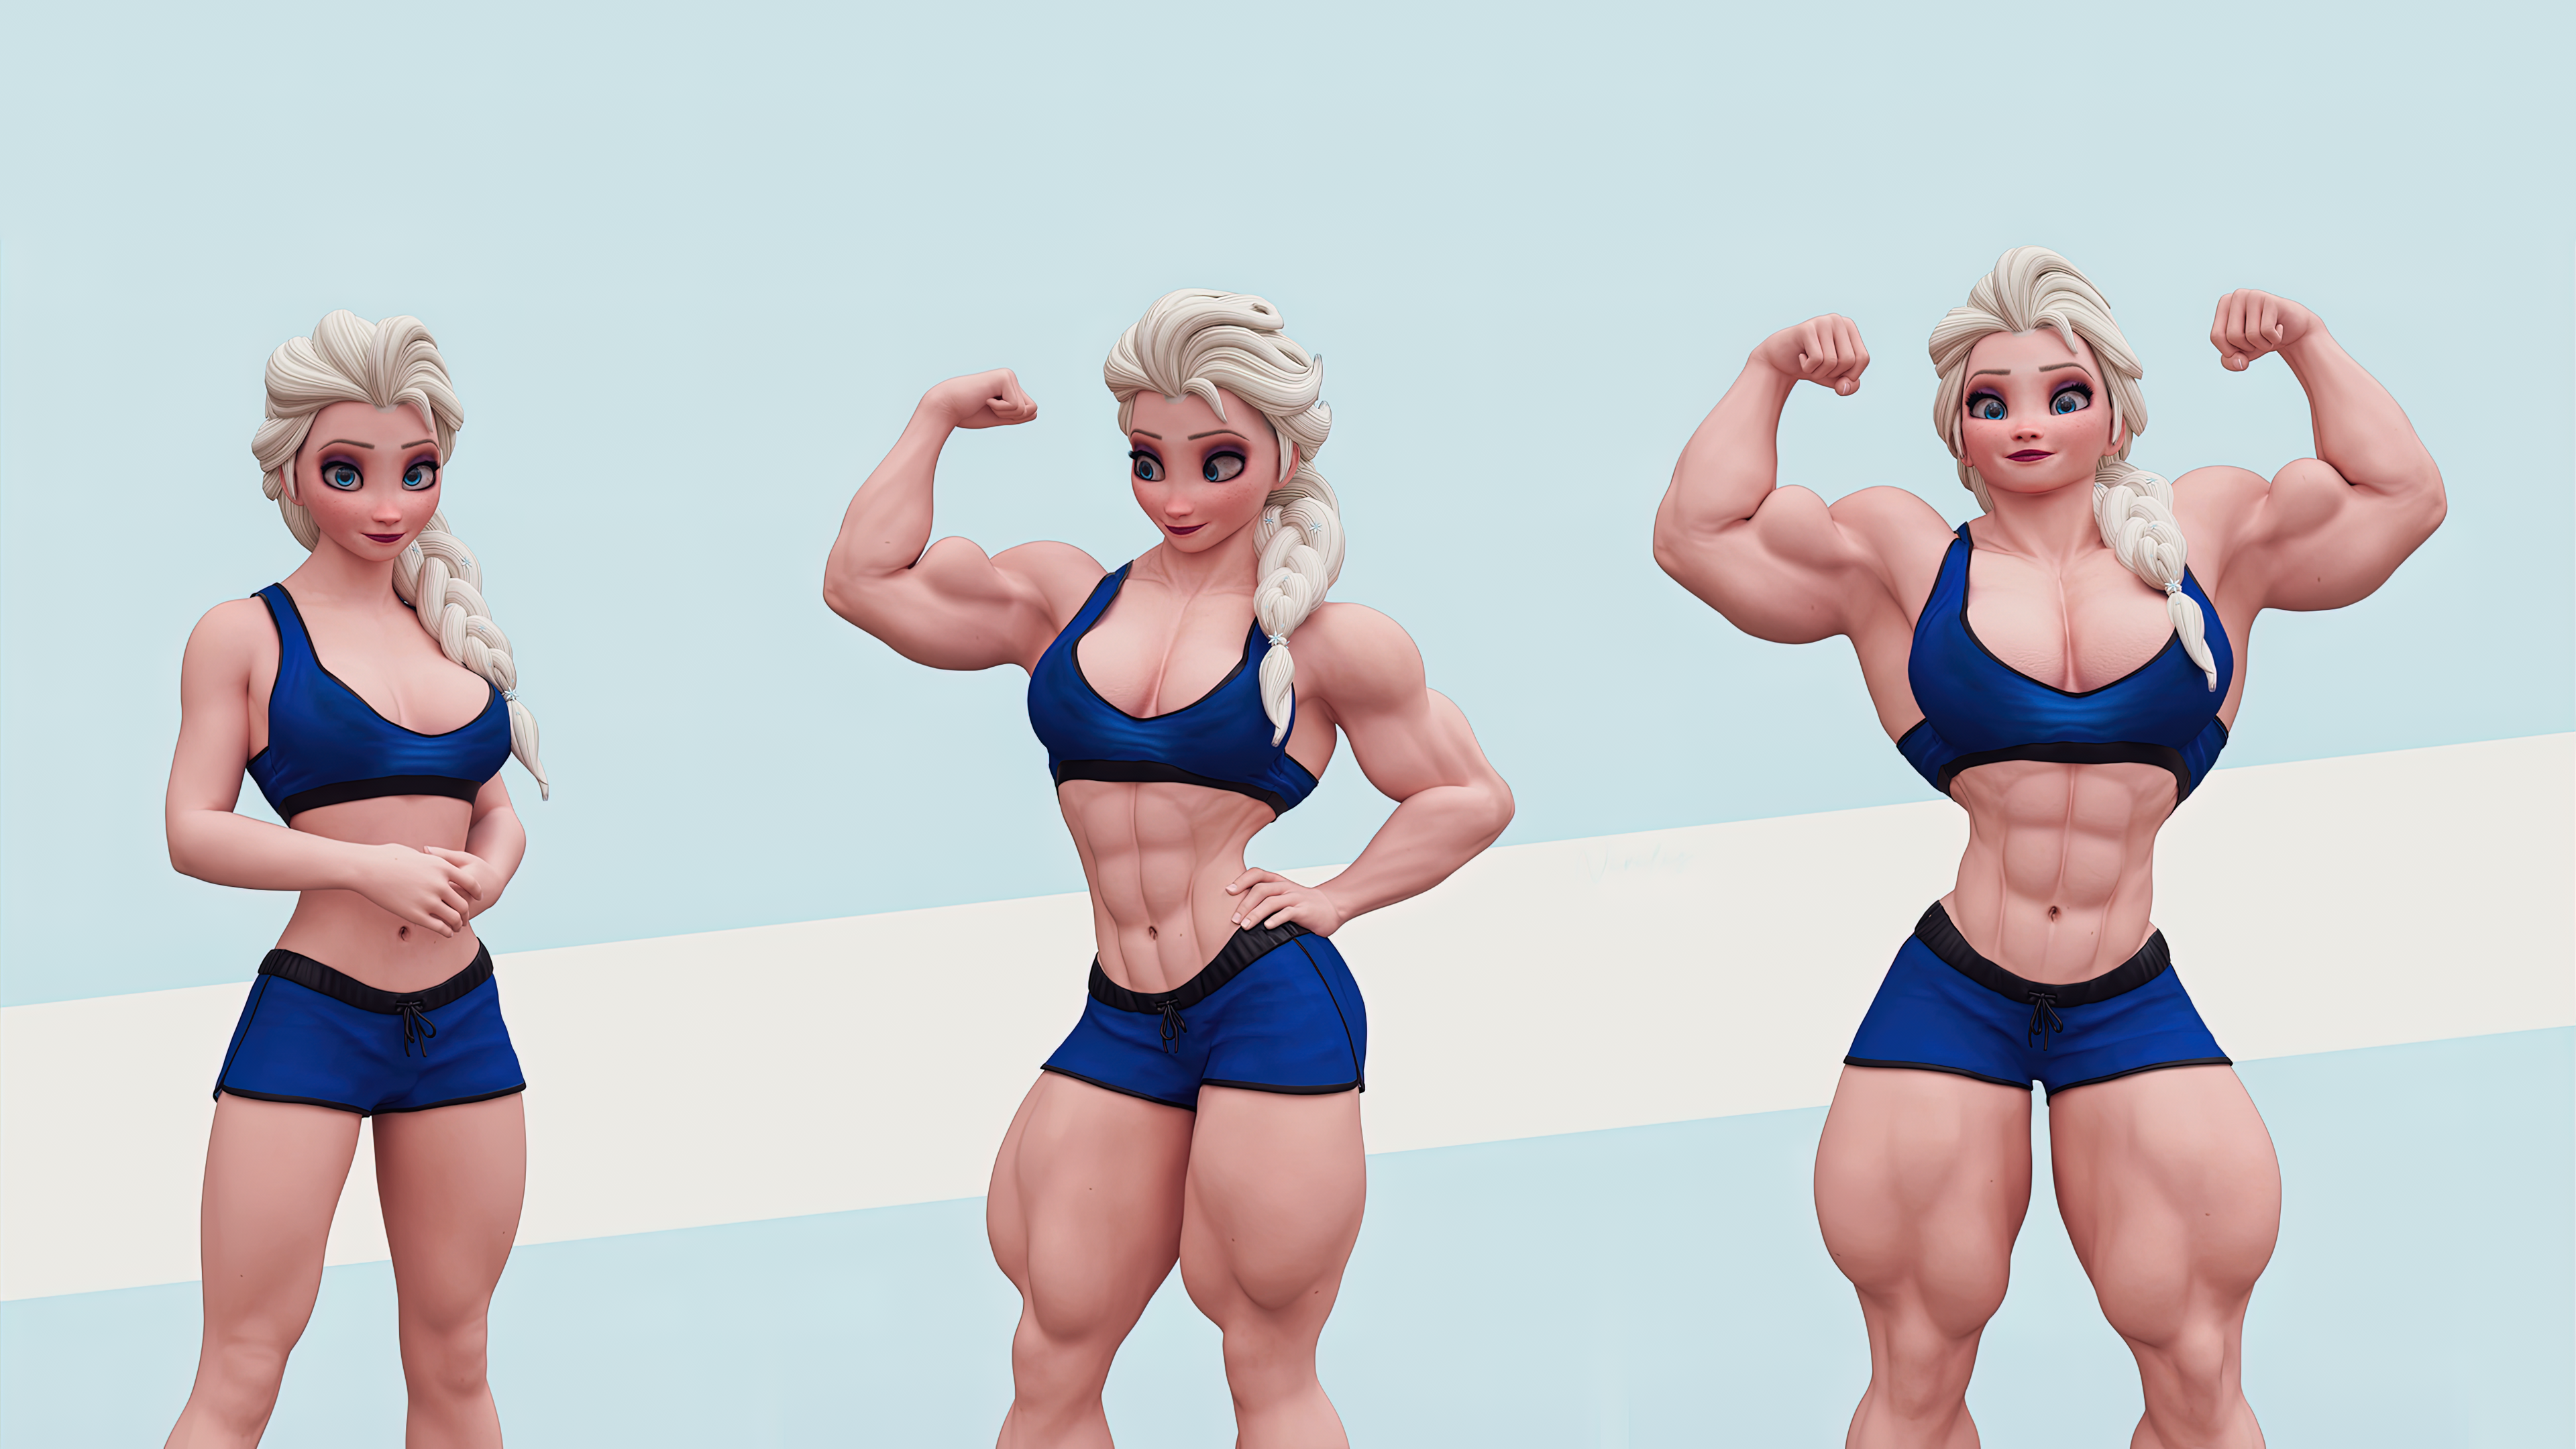 General 3840x2160 muscles muscular 6-pack abs toned female artwork biceps strong woman simple background braids cartoon